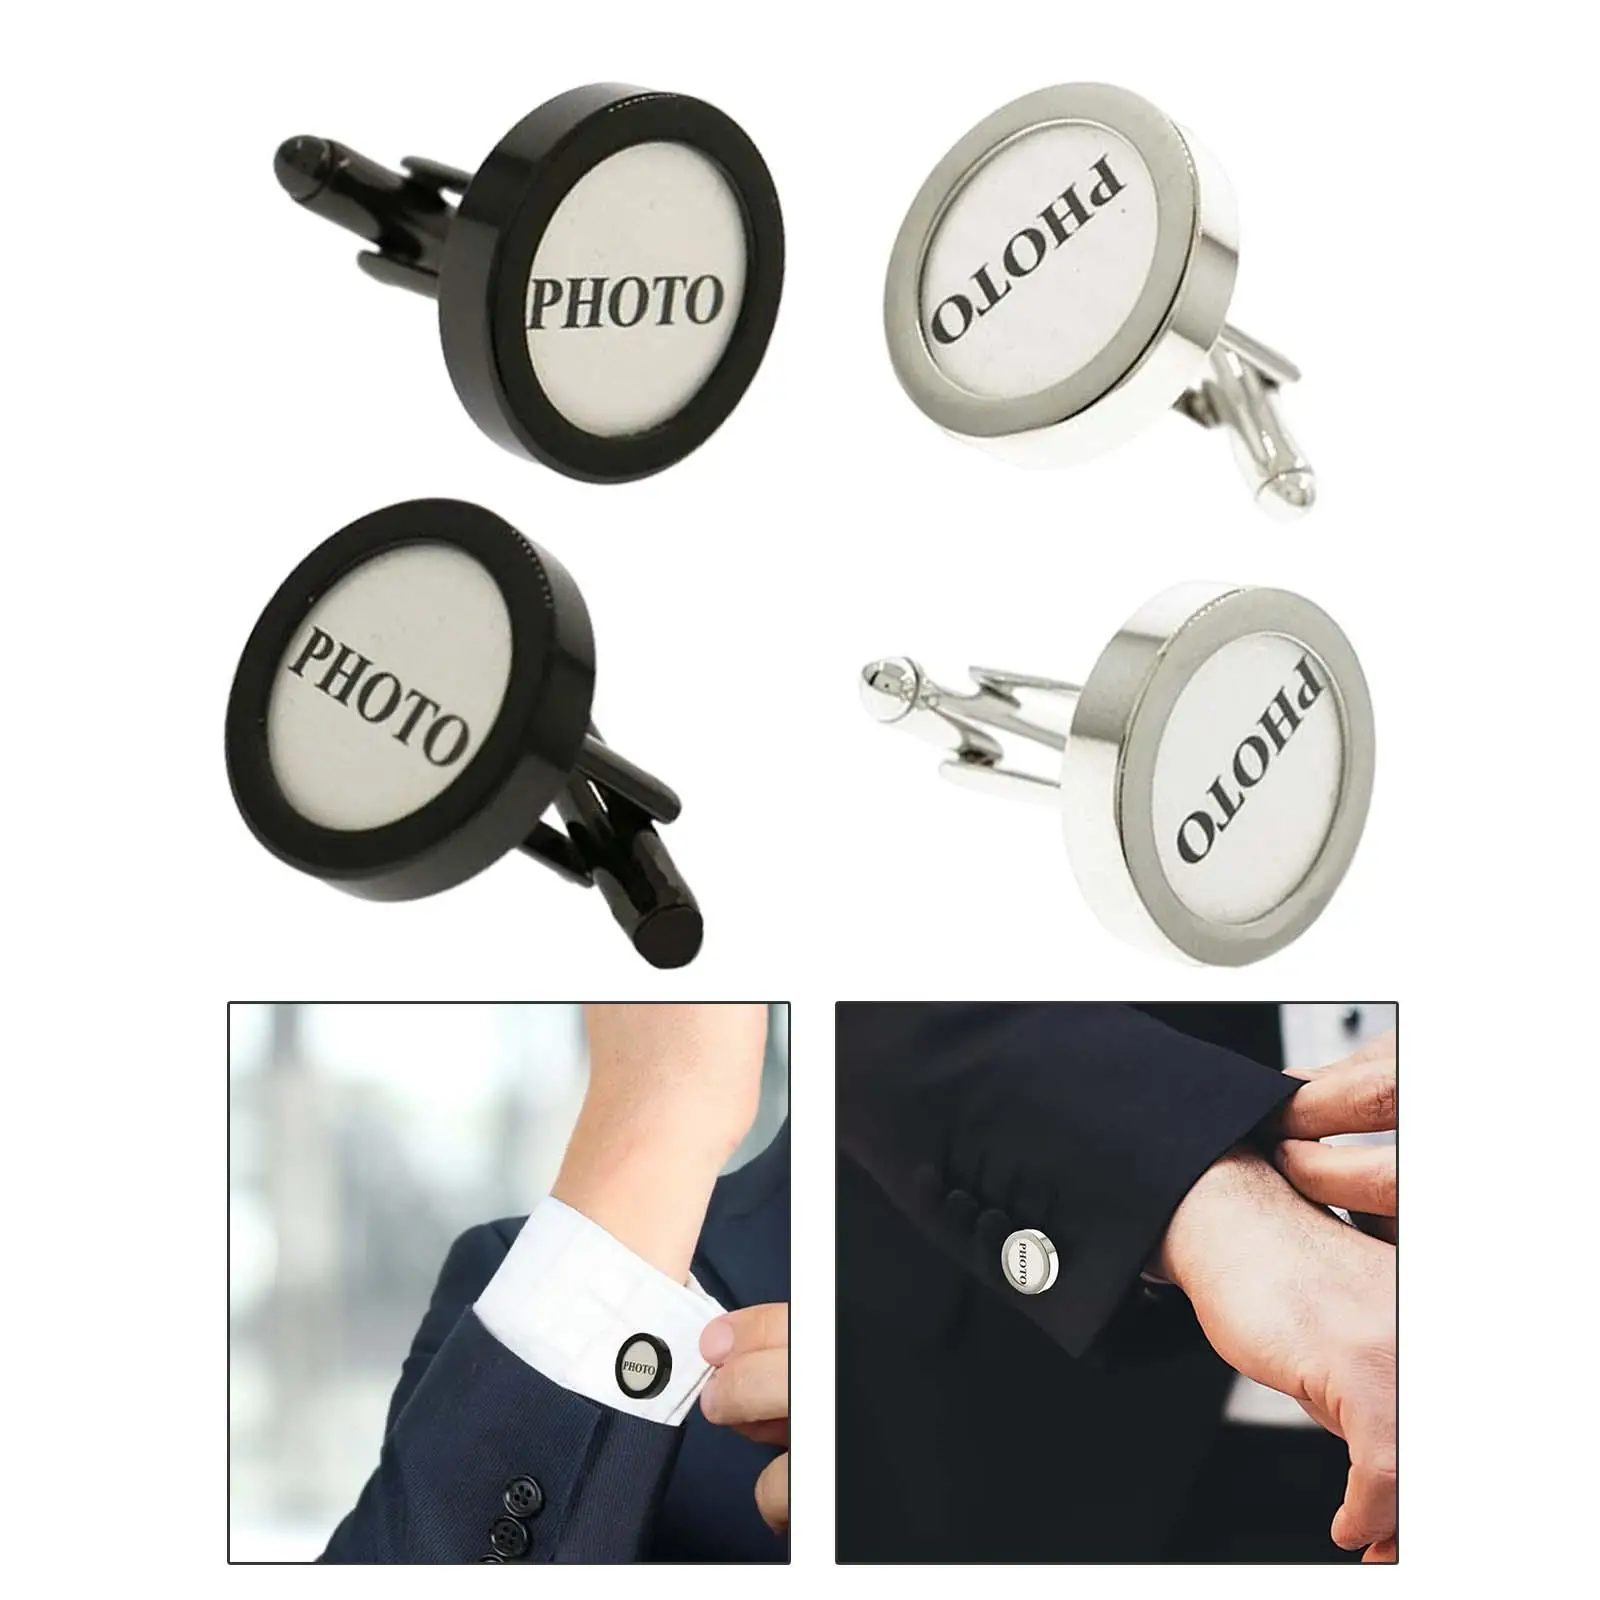 2 Pieces Metal Cufflinks Shirt Accessories Screw Twist Shirt Cuff Links for Daily Clothing Banquet suits Graduation Party